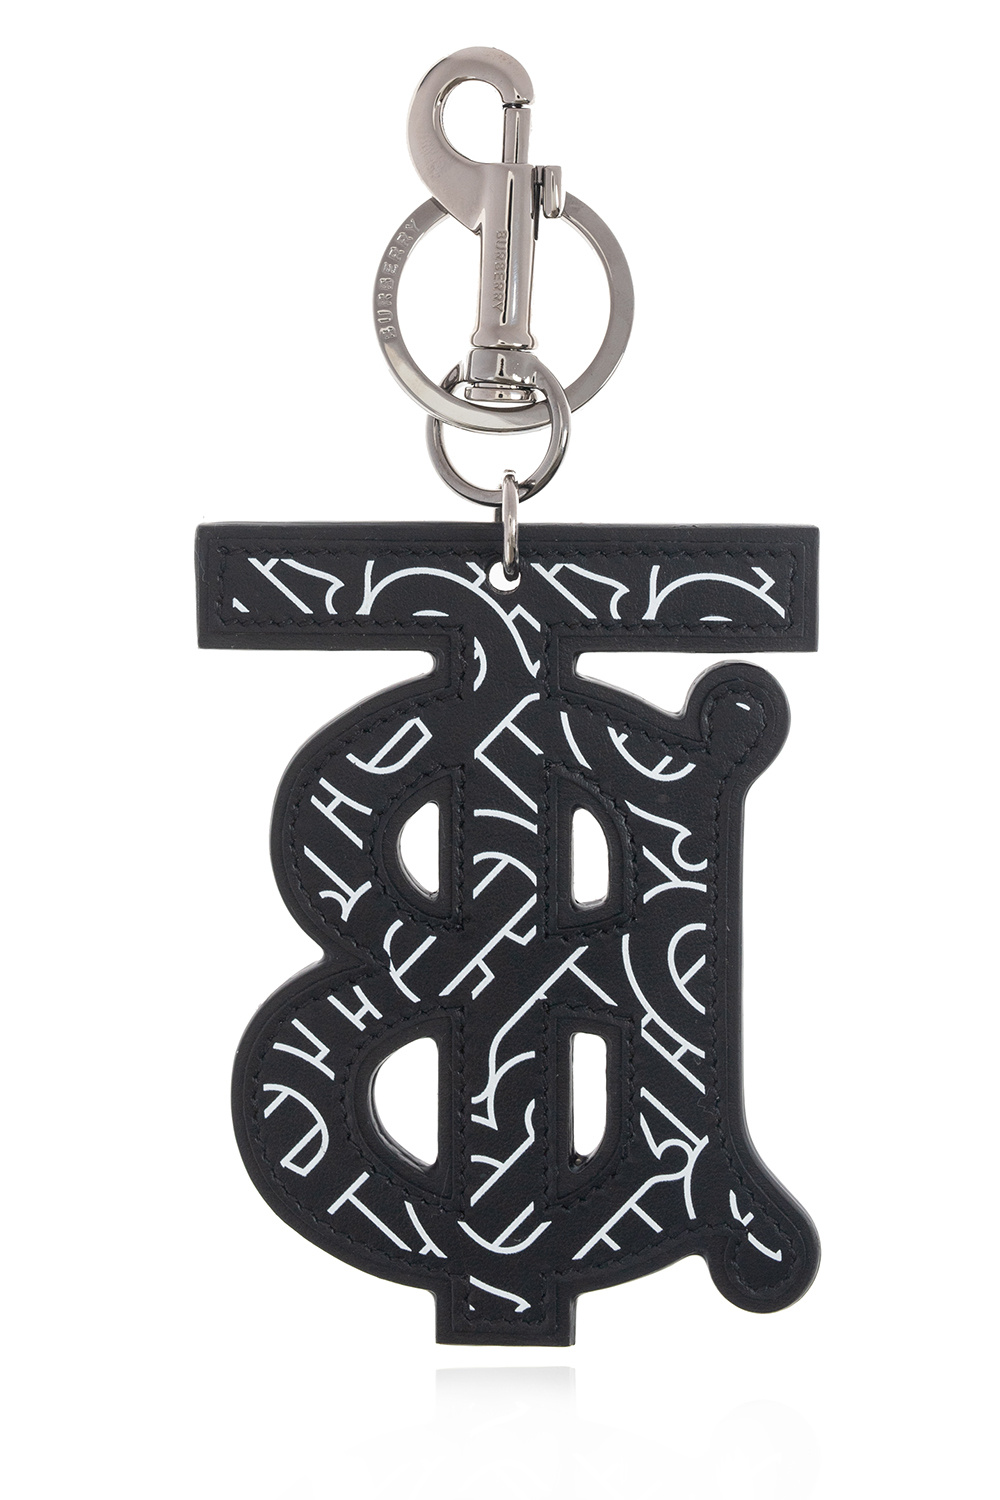 Burberry Keyring with logo, Men's Accessories